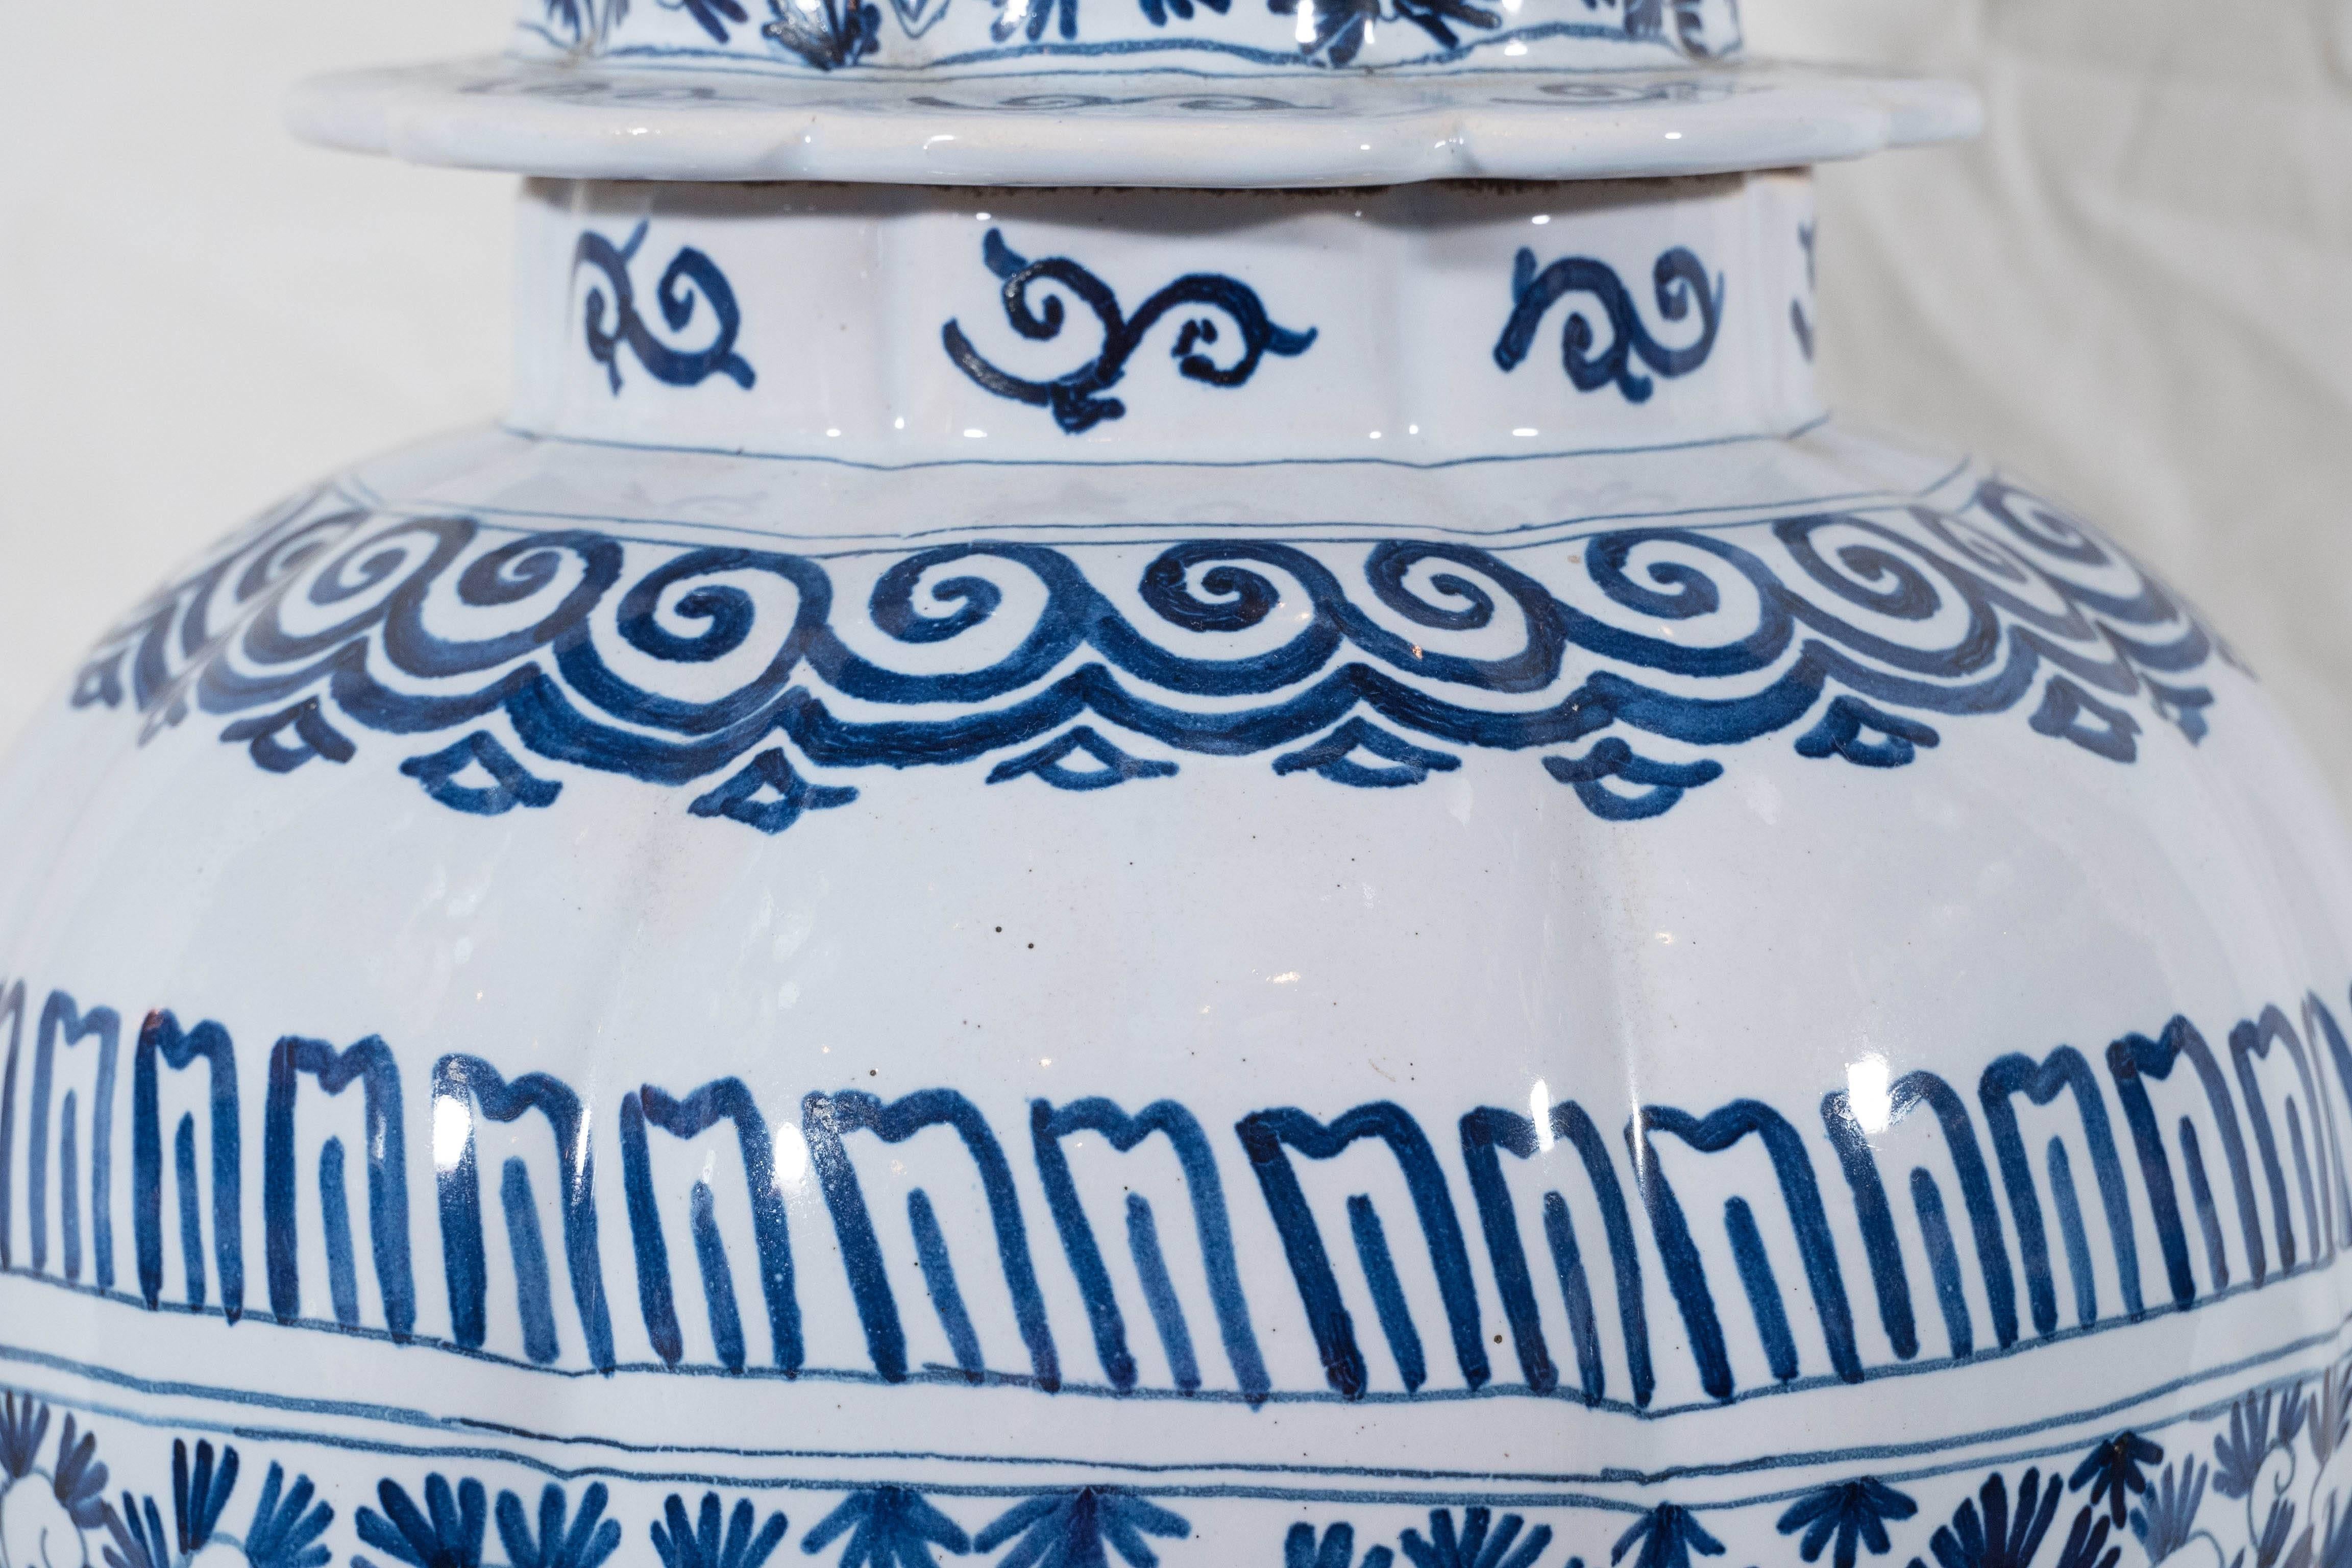 A pair of Dutch Delft blue and white covered jars. Painted with a lively pattern of flower heads, leaves and scrolling vines. The base, shoulders and cover decorated with bands of geometric designs. The cover with a lobed edge and traditional round